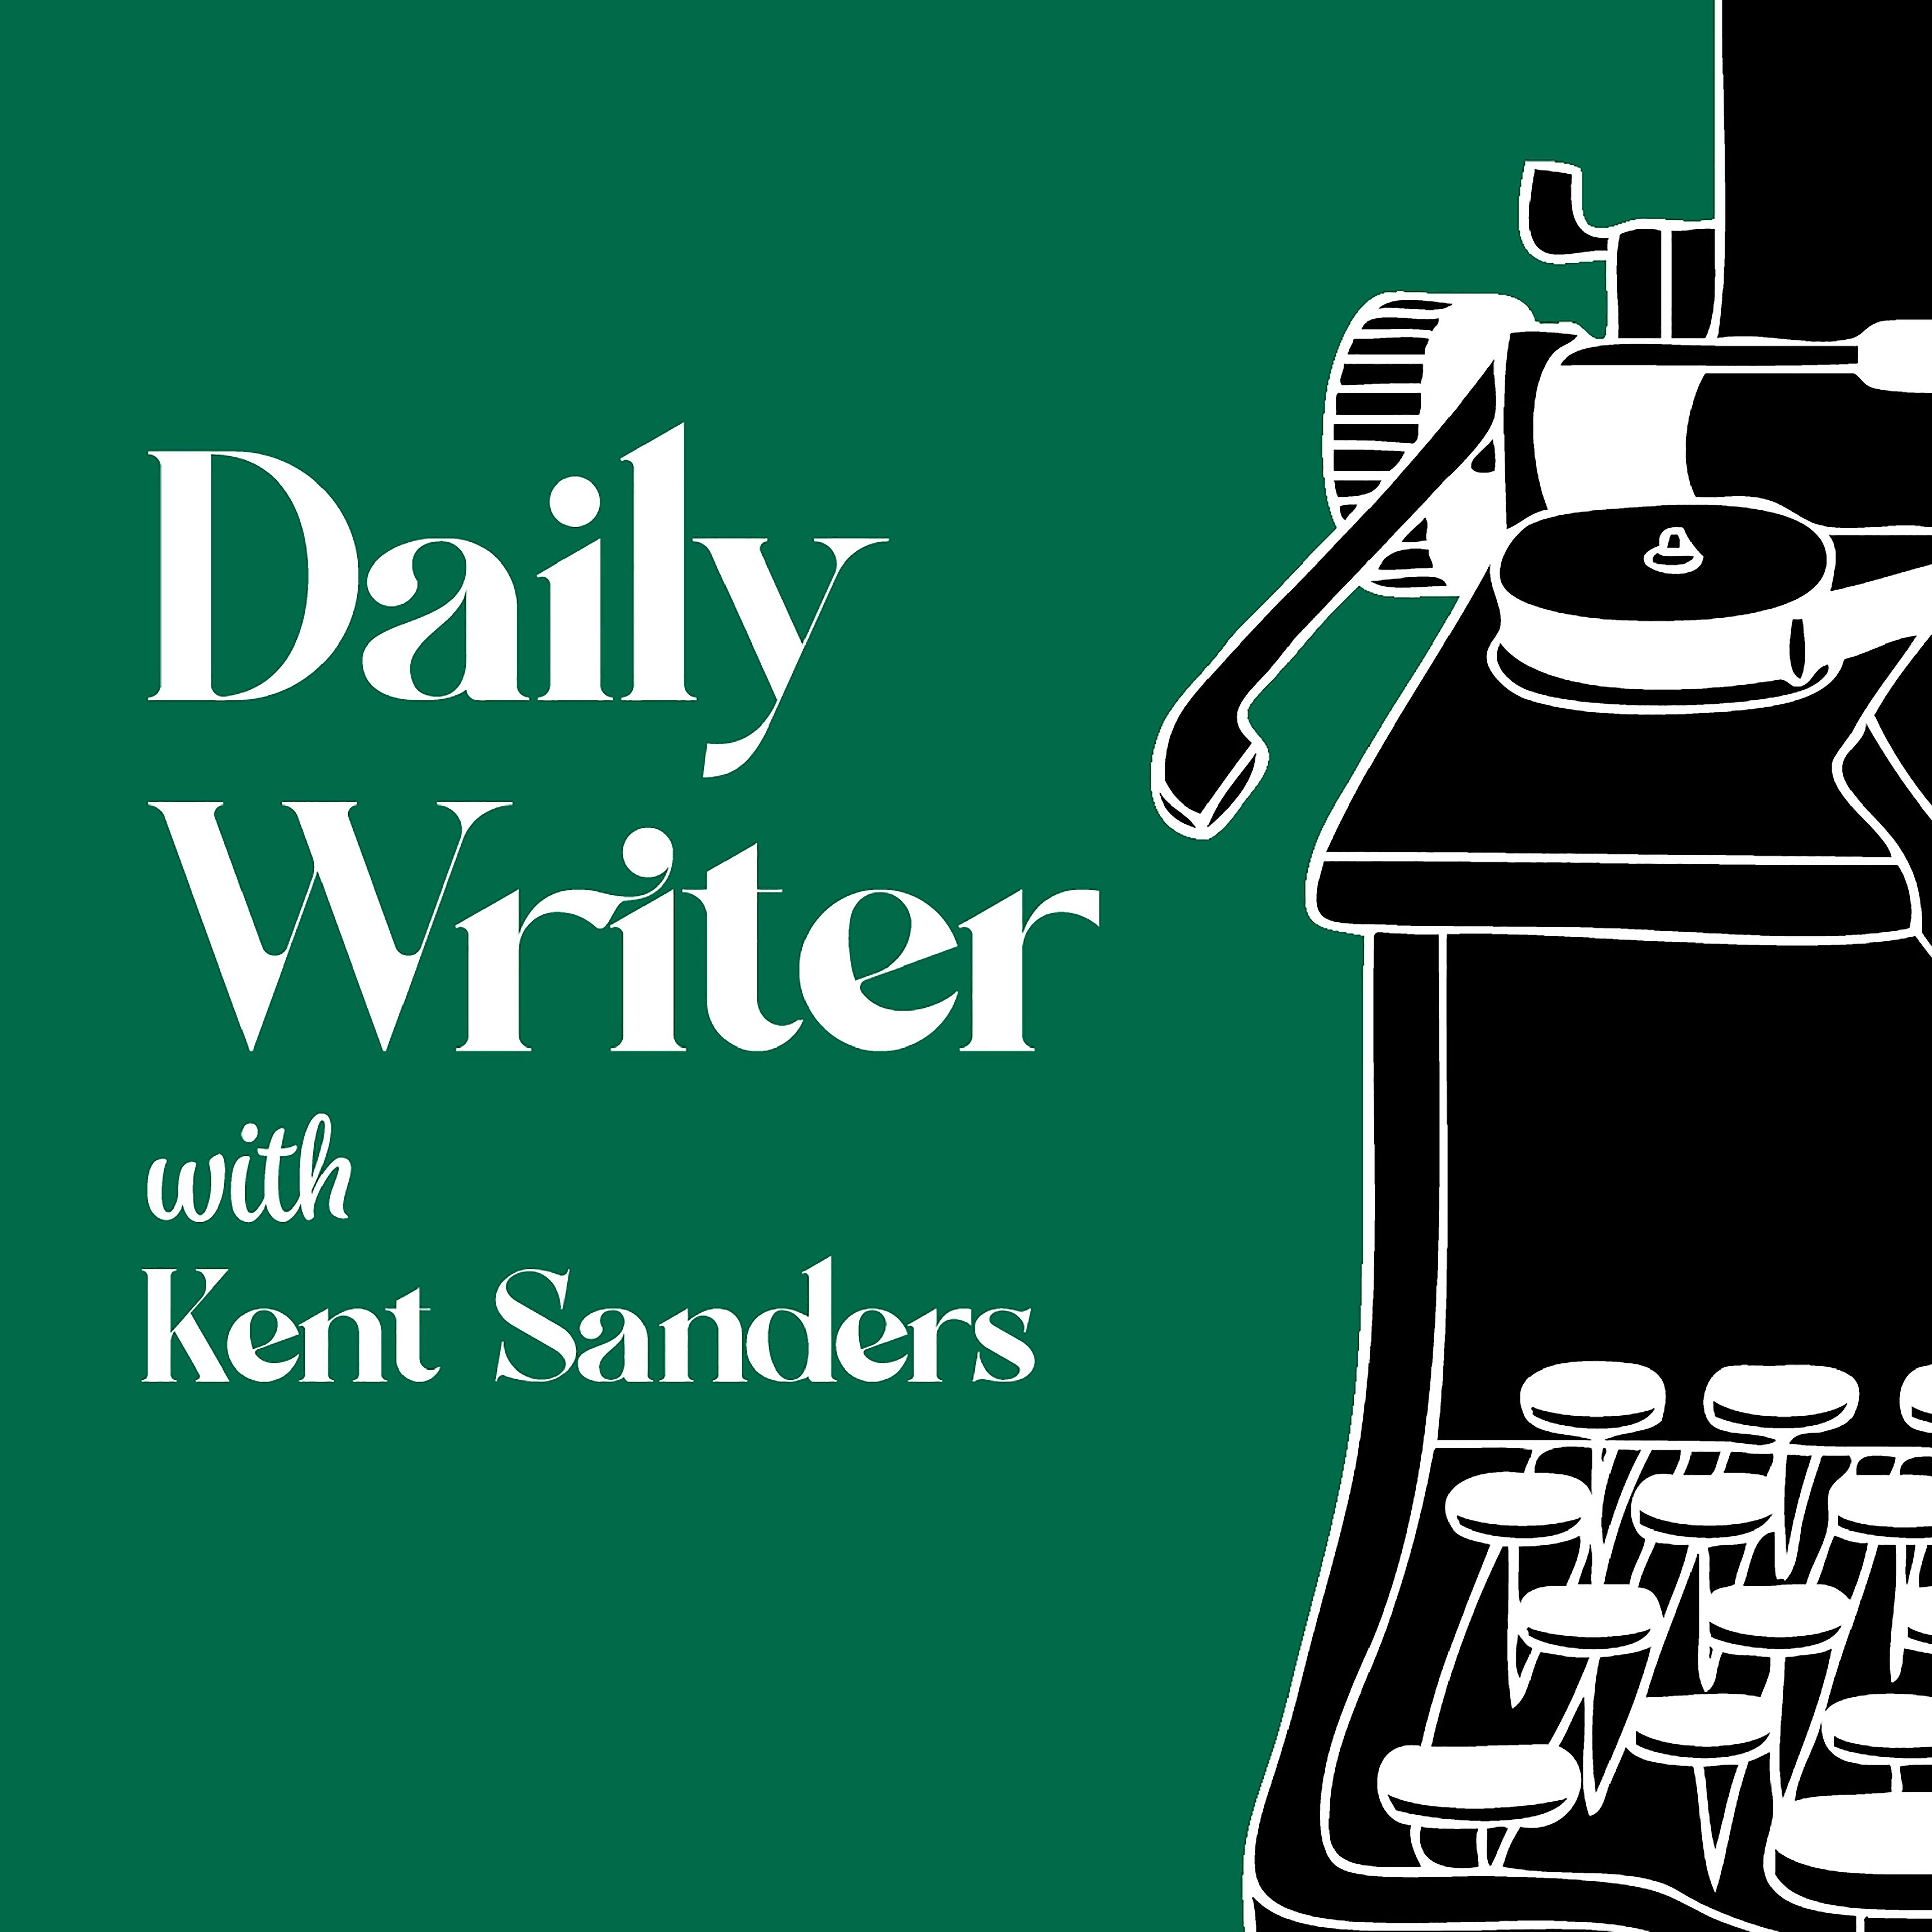 The Daily Writer with Kent Sanders cover image